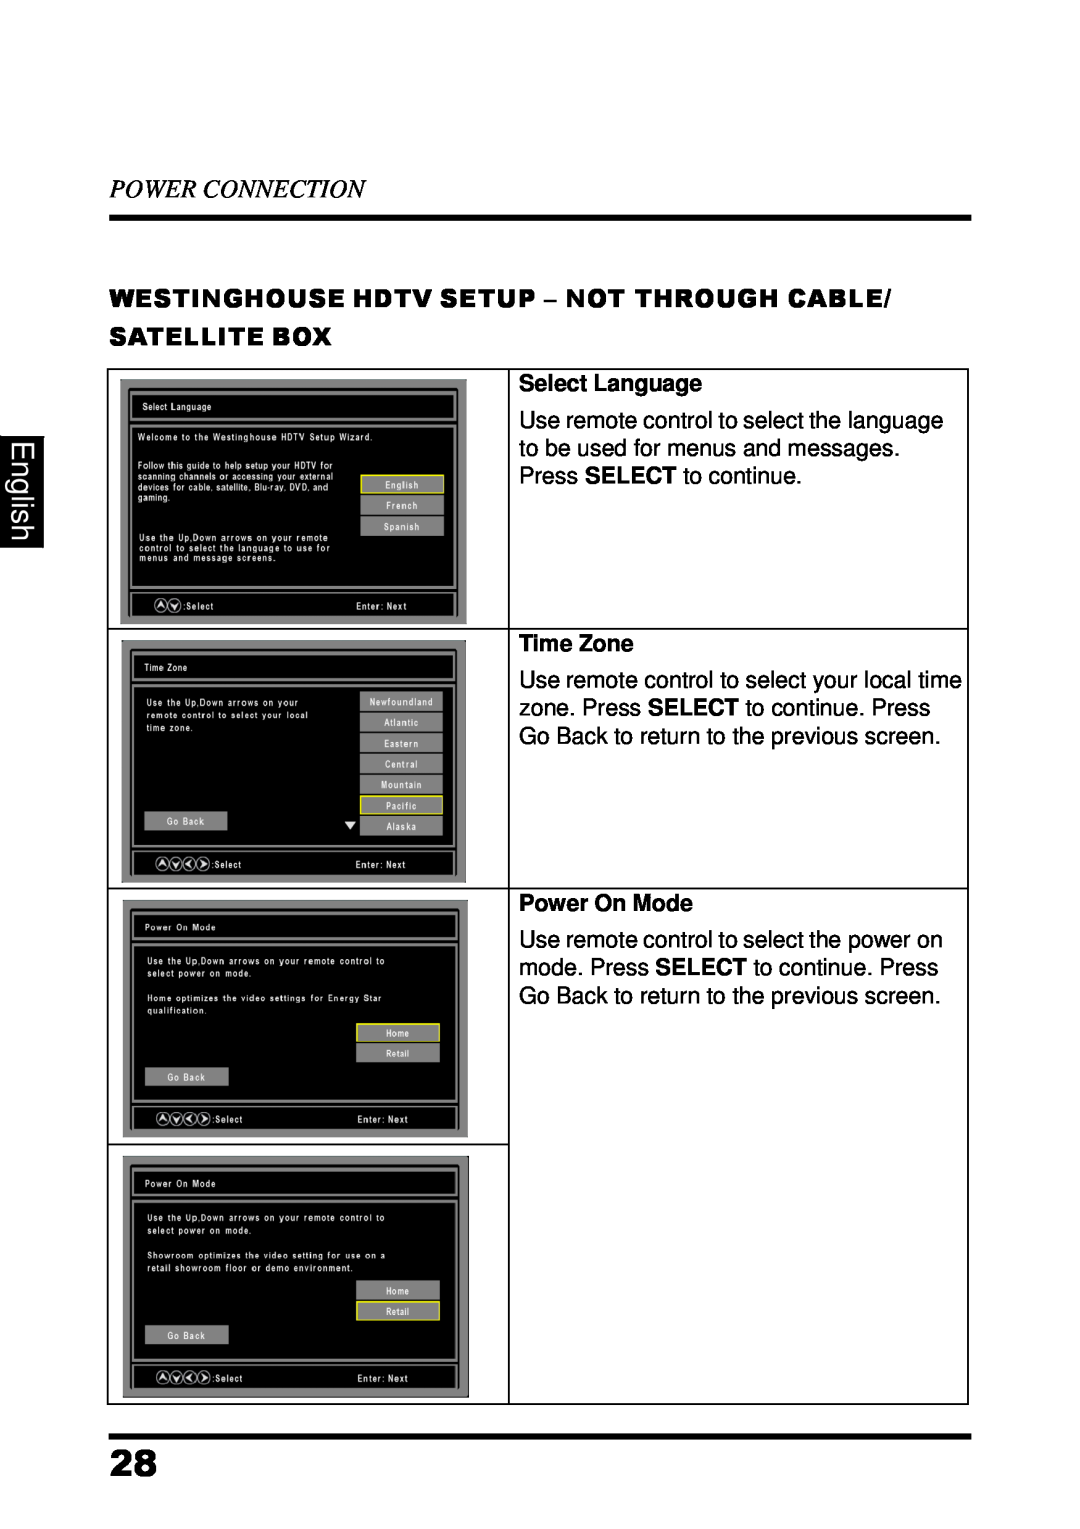 Westinghouse UW48T7HW English, Power Connection, Westinghouse Hdtv Setup - Not Through Cable Satellite Box, Time Zone 